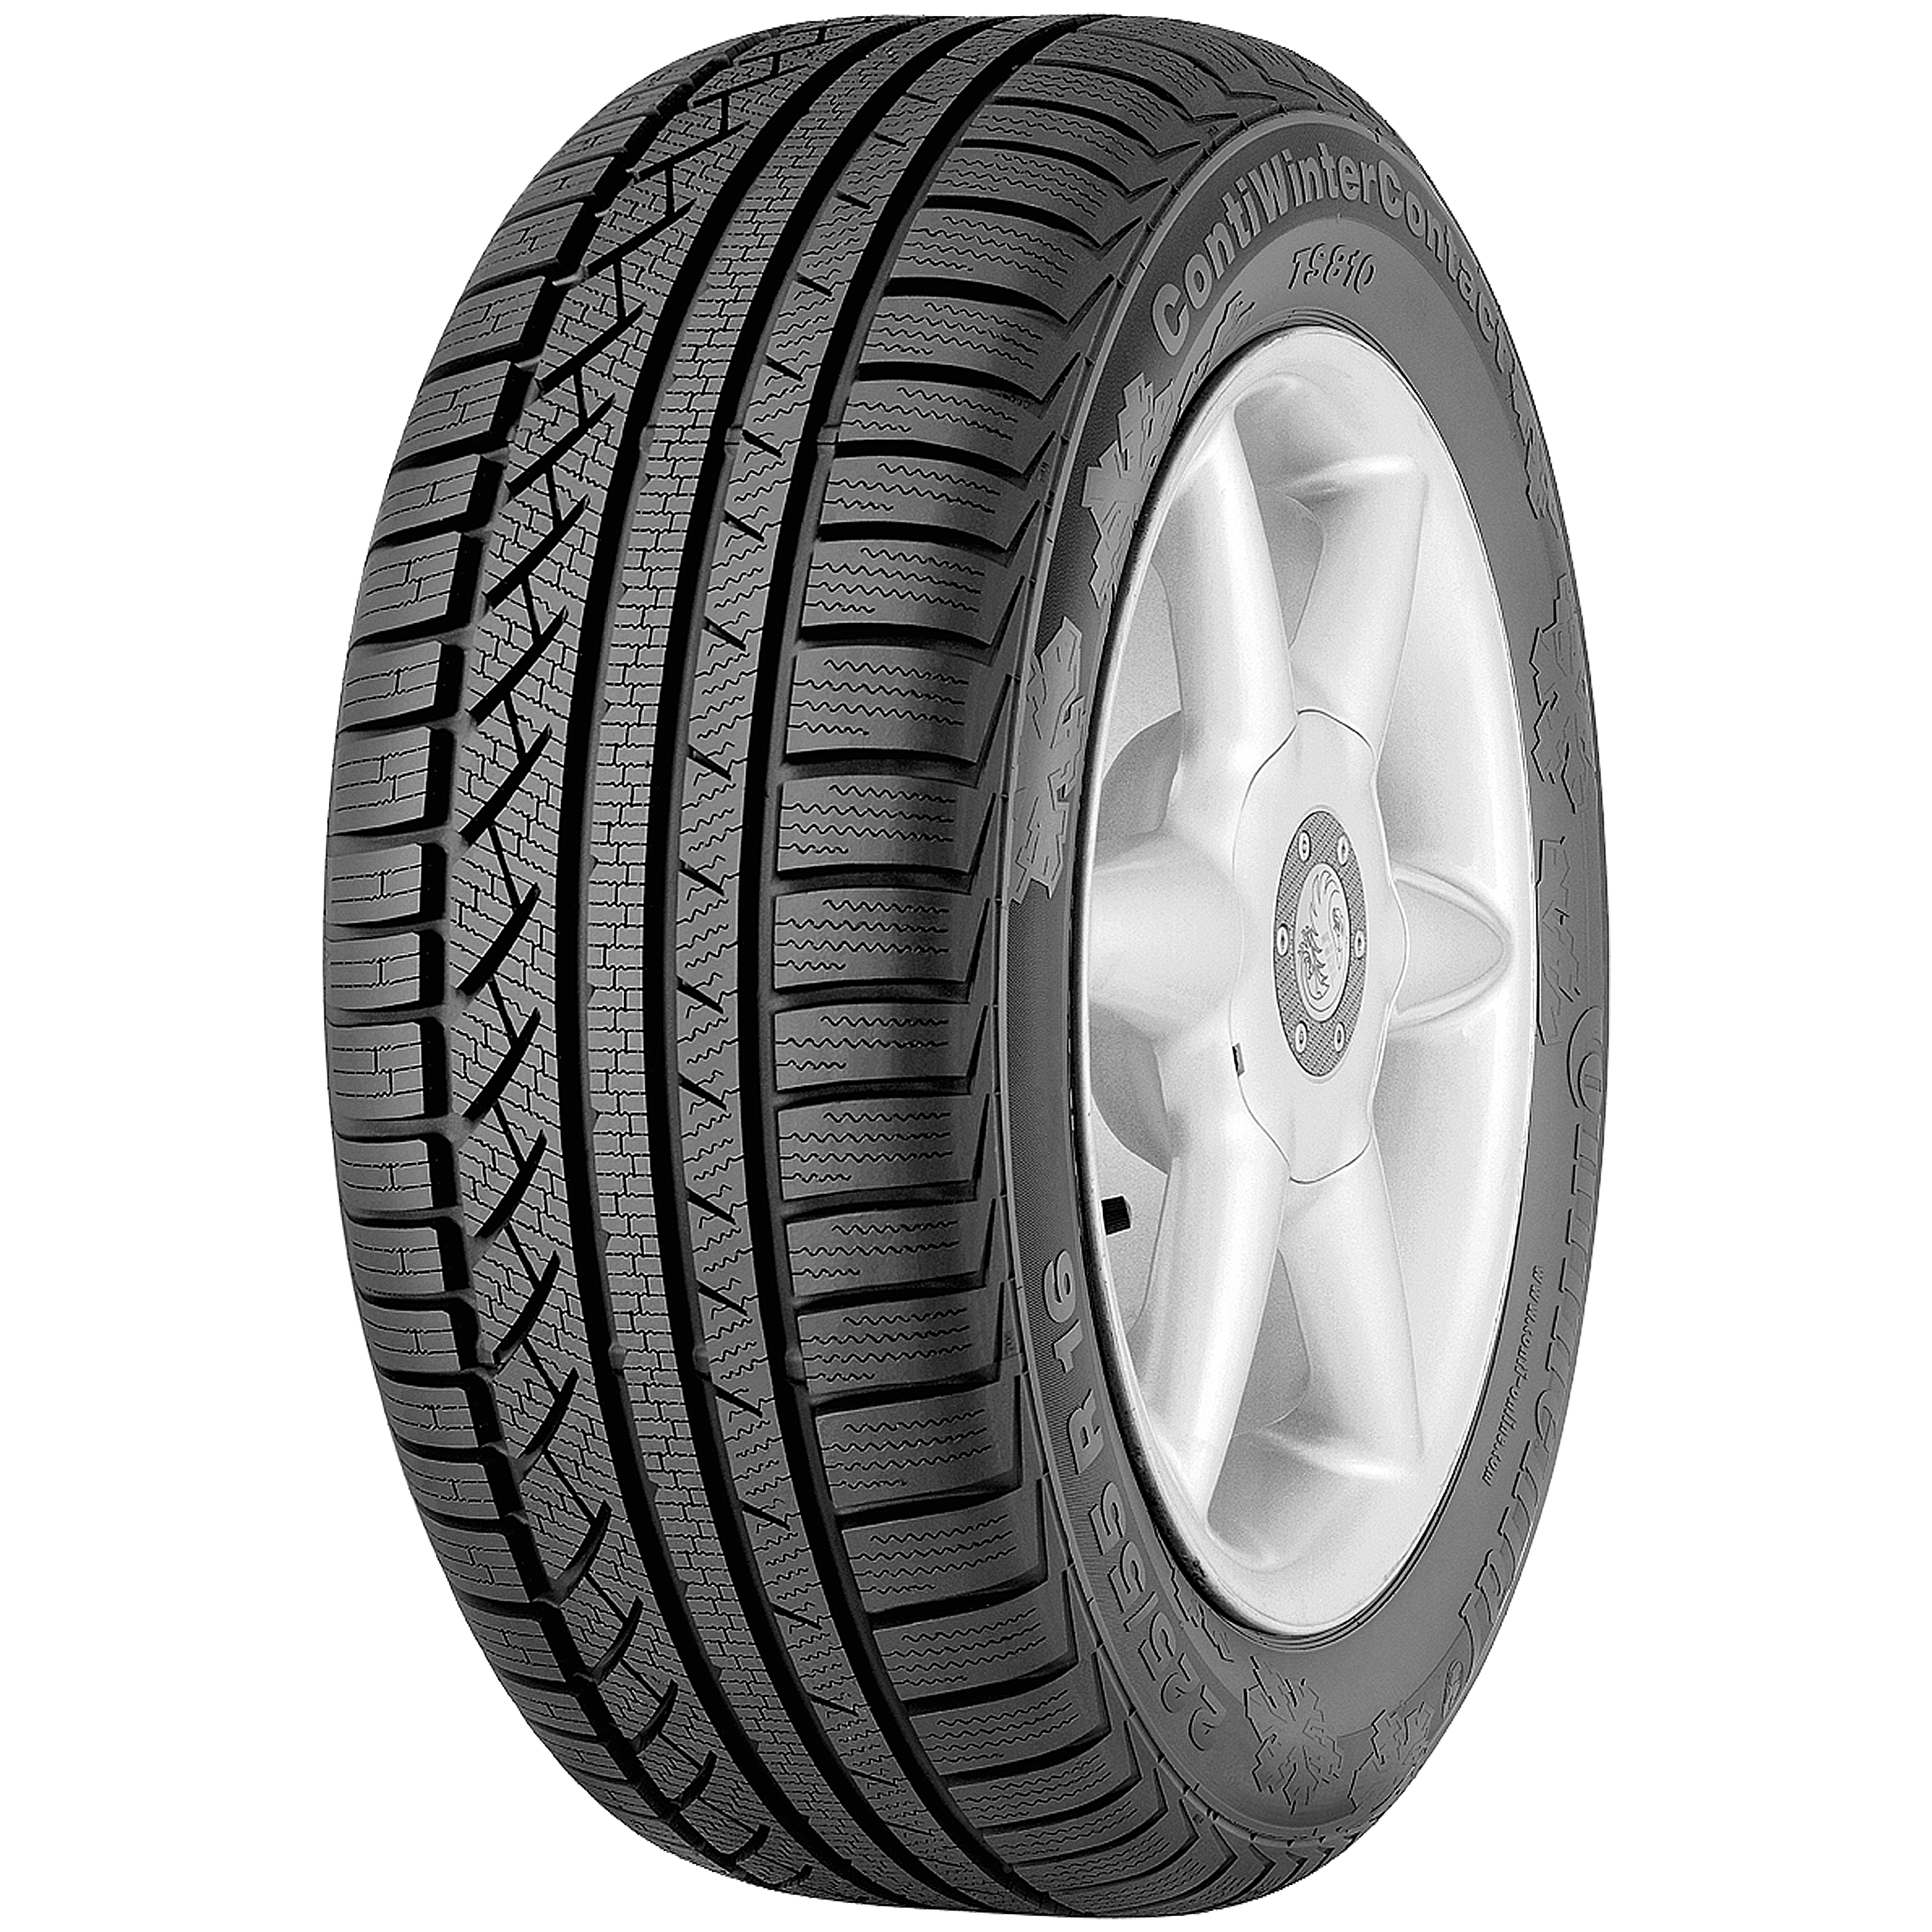 ContiWinterContact TS 810: The comfortable medium cars tire luxury-class and winter for